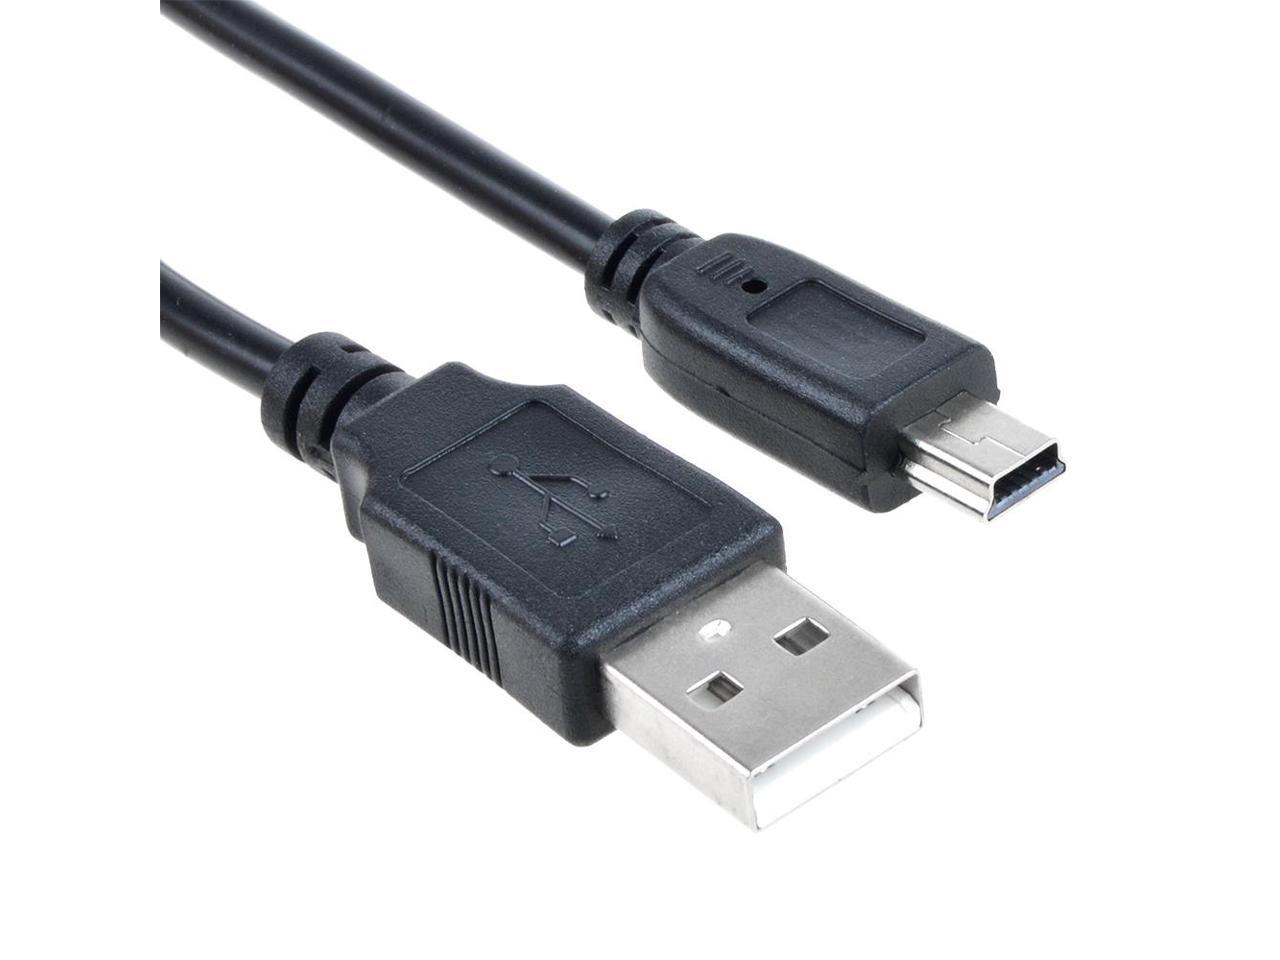 USB DC5V Charging Cable Cord For i.Sound iSound Pyramid Bluetooth Wireless Speak 